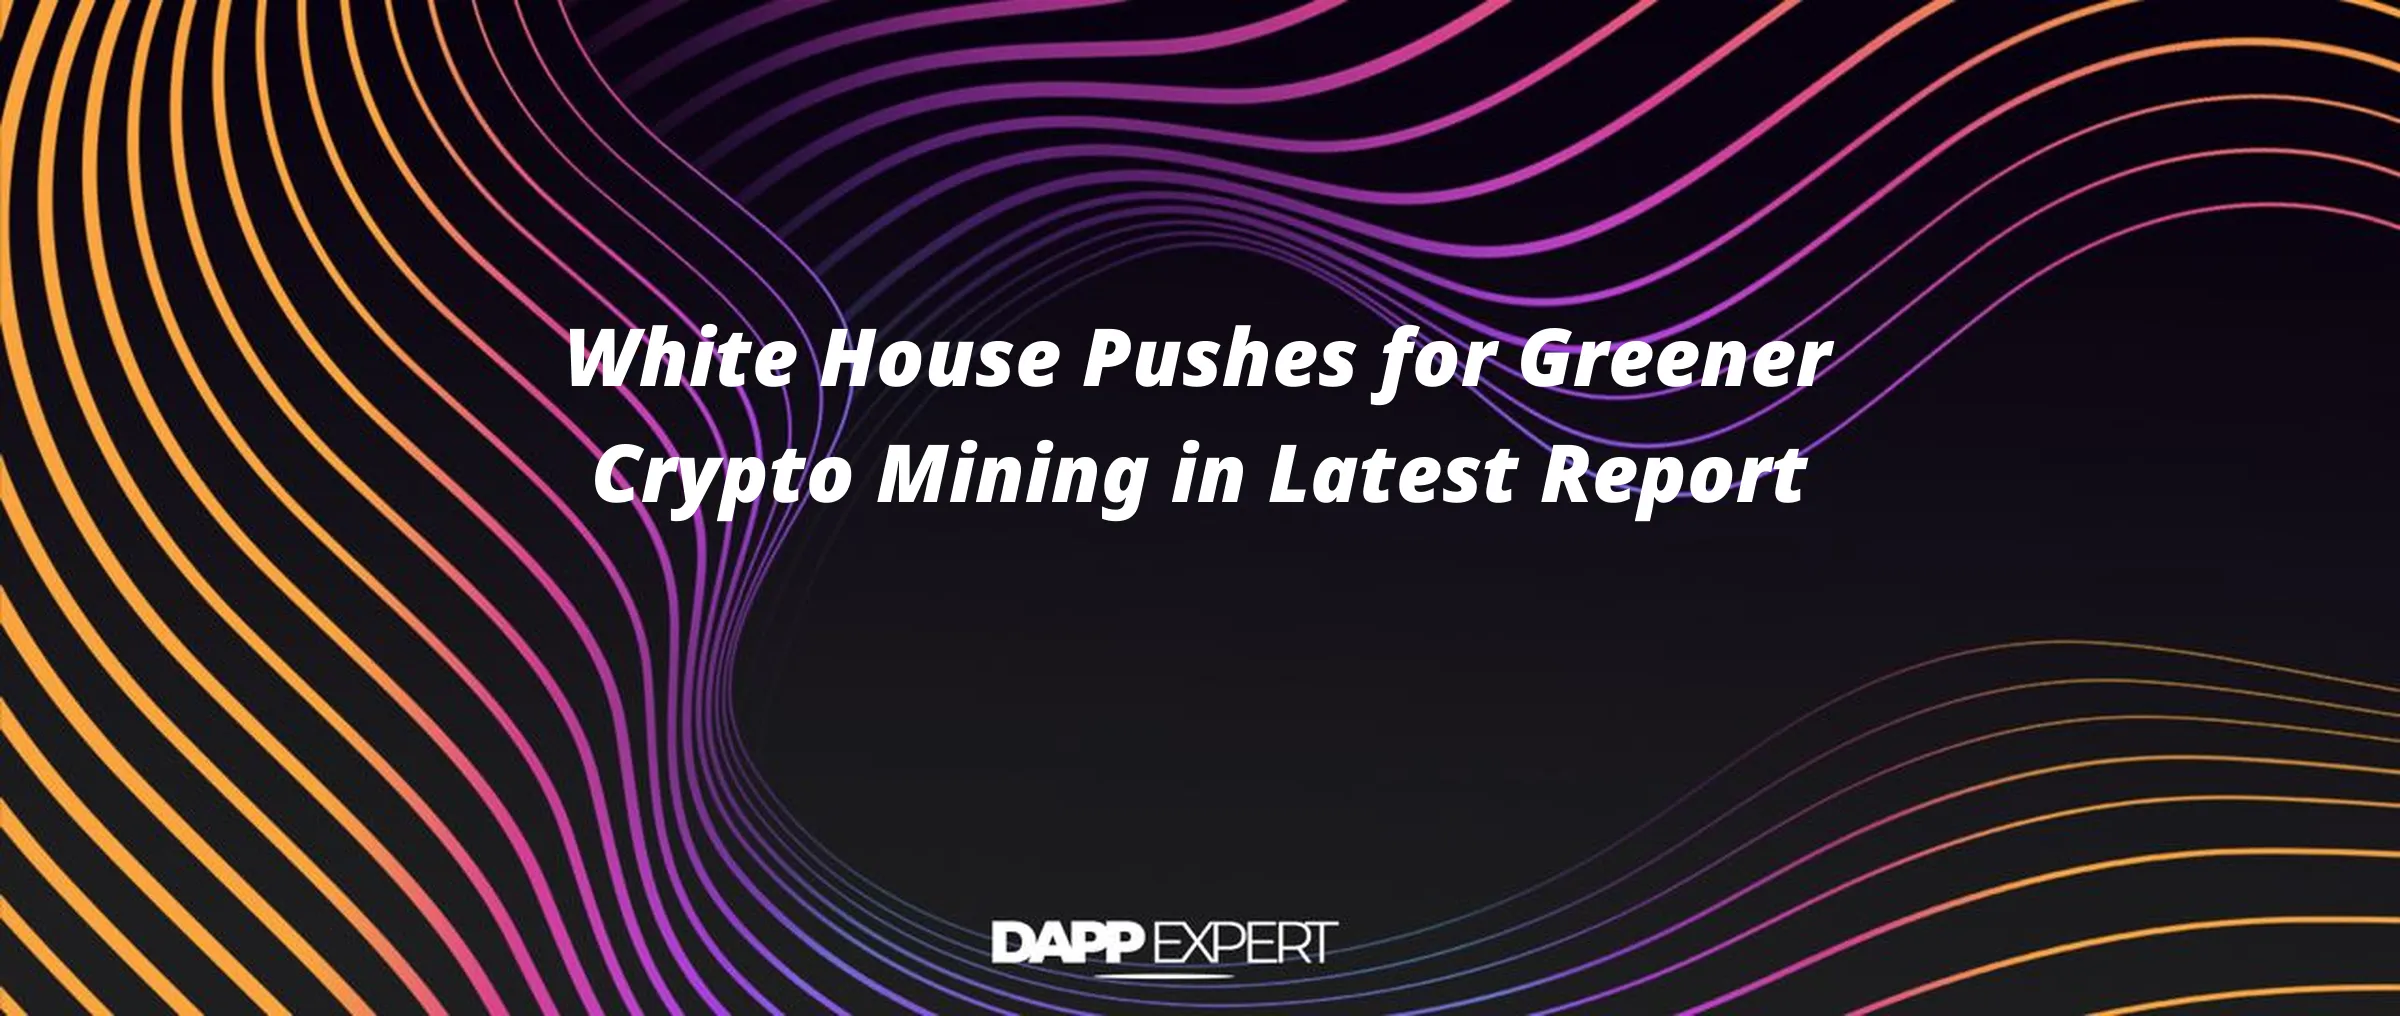 White House Pushes for Greener Crypto Mining in Latest Report